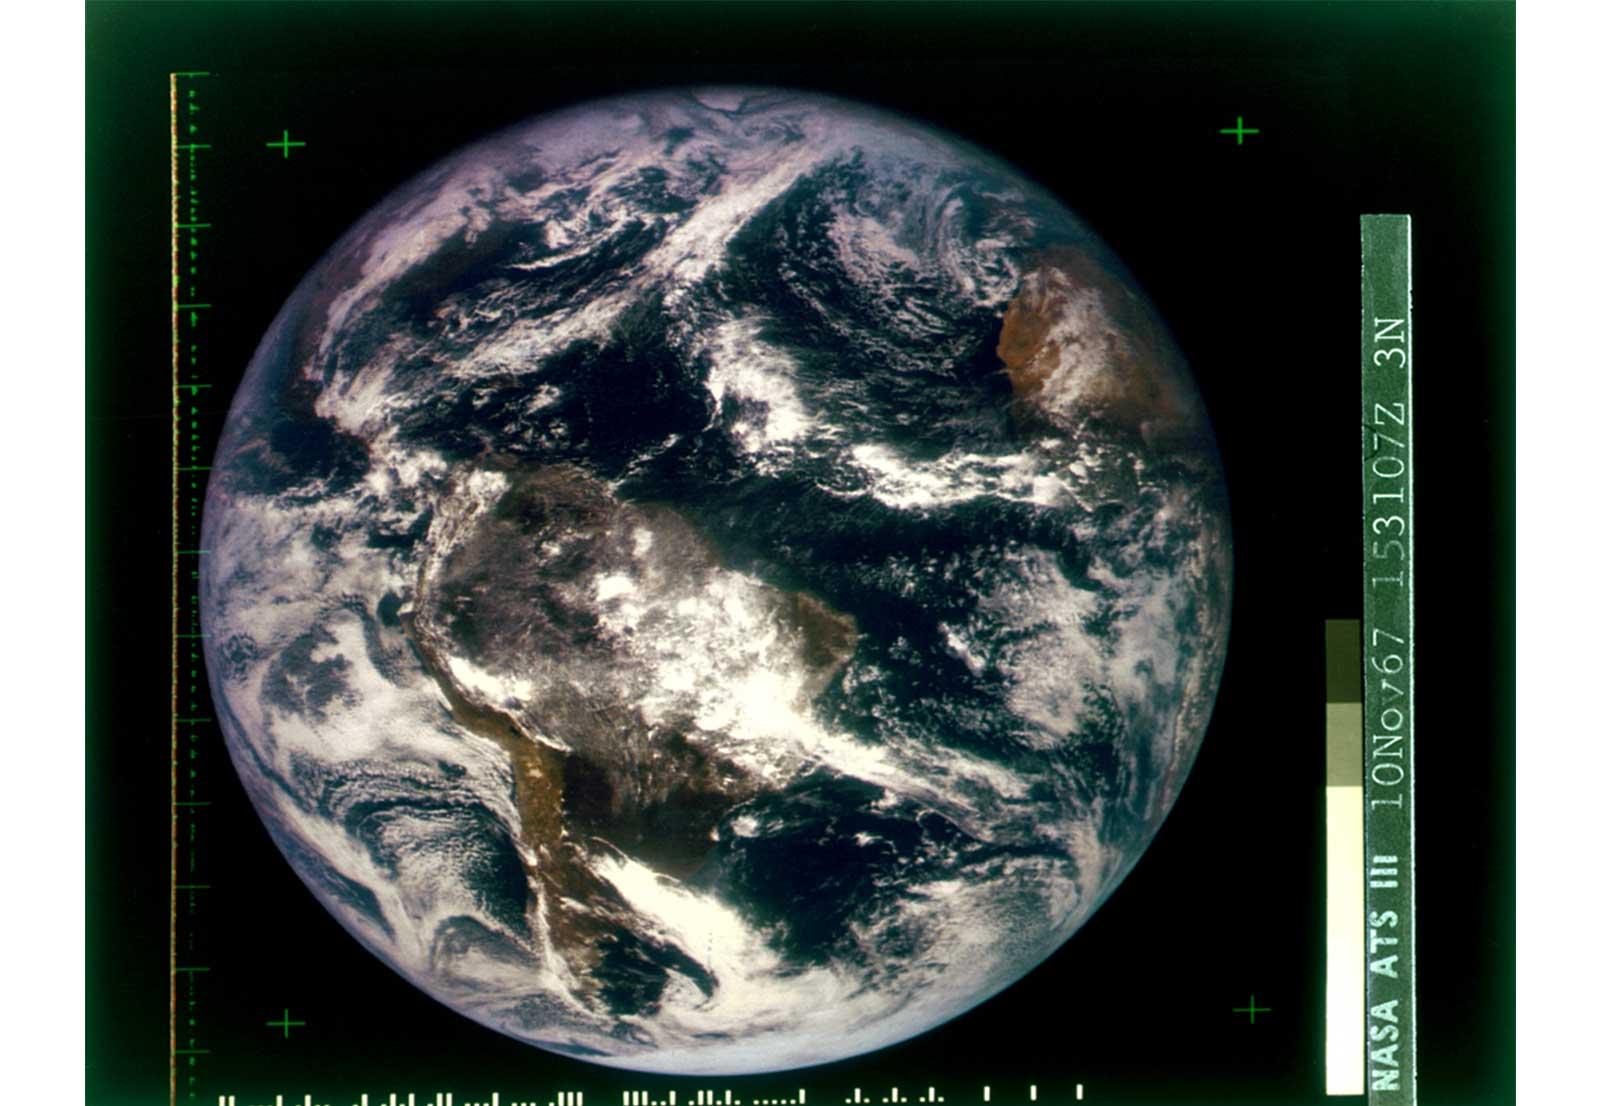 This early color image of the earth taken in 1967 was used as the cover image for the first edition of Whole Earth Catalog.